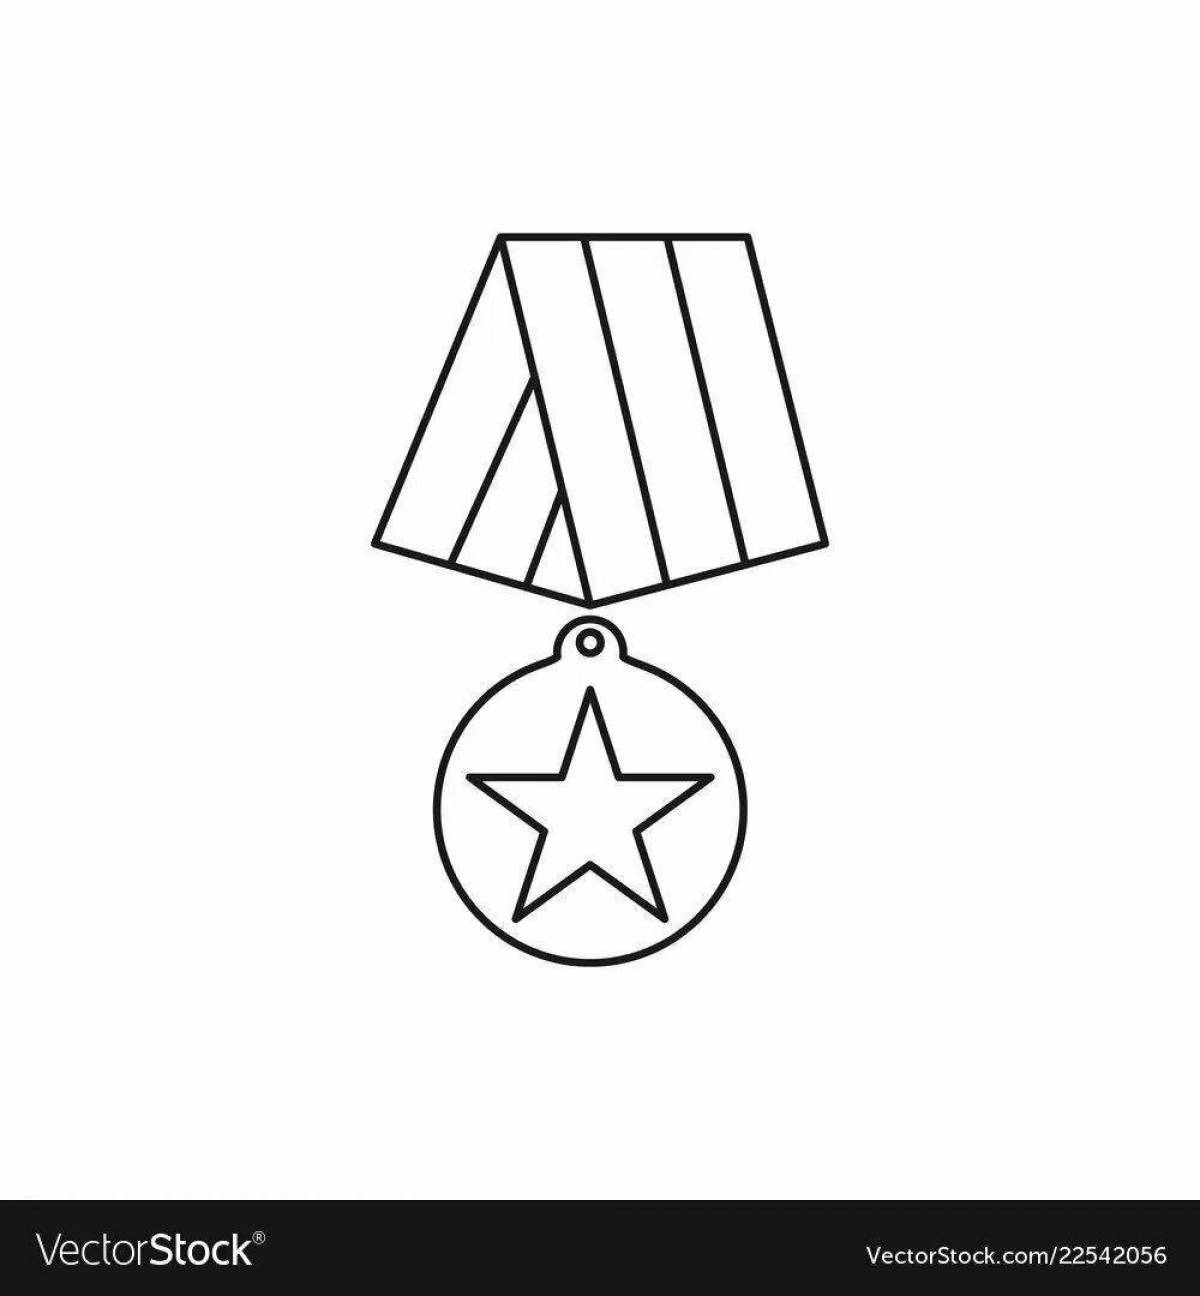 Impressive ussr star coloring page